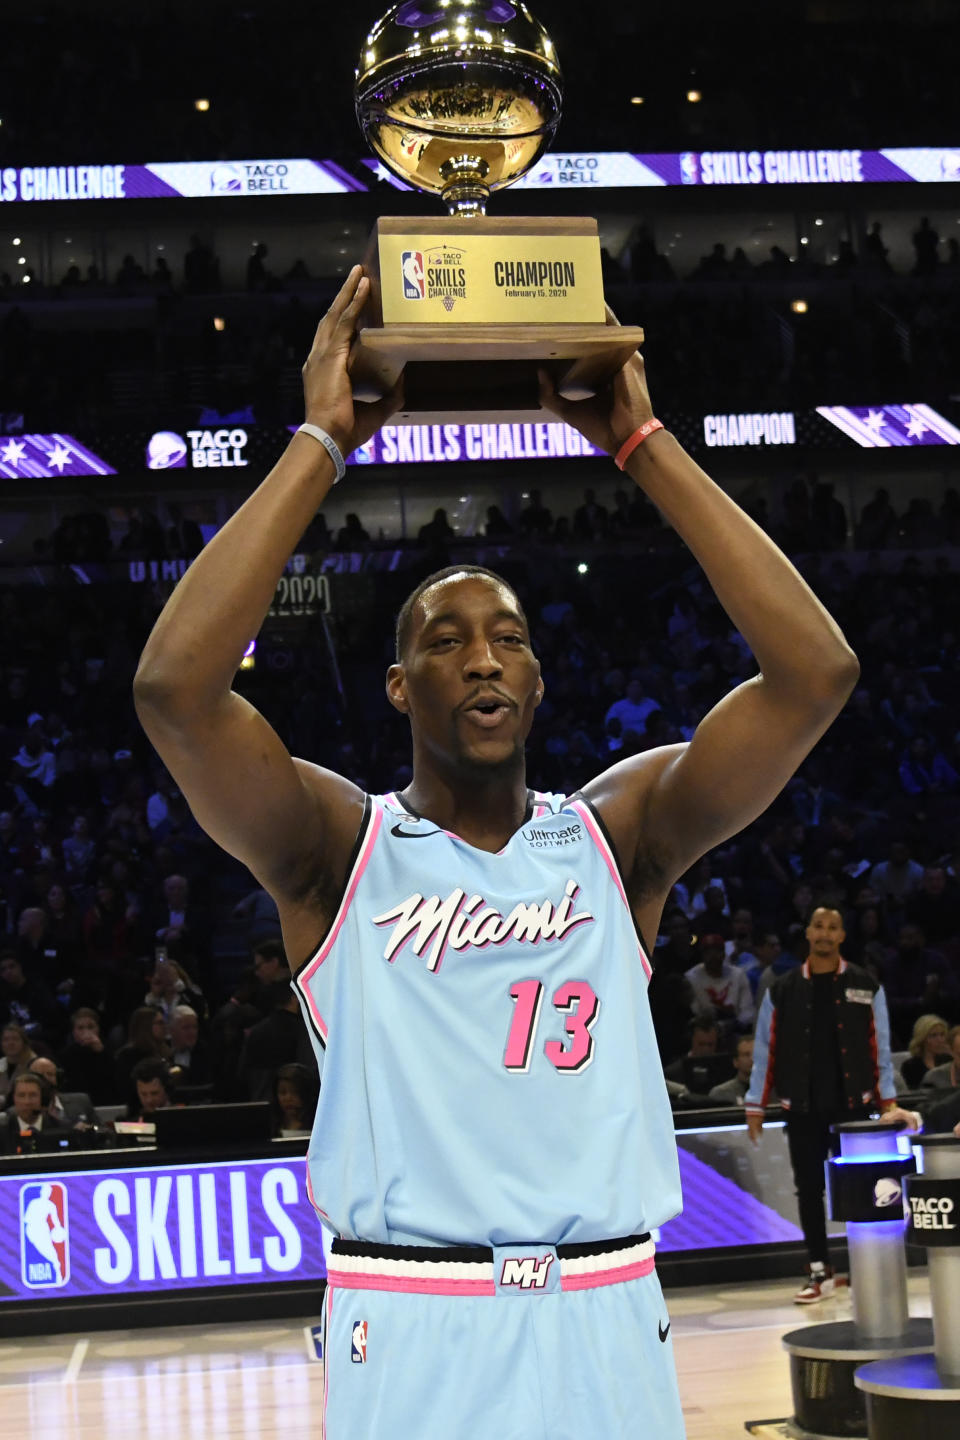 Miami Heat's Bam Adebayo holds the trophy after winning NBA basketball's All-Star skills challenge Saturday, Feb. 15, 2020, in Chicago. (AP Photo/David Banks)